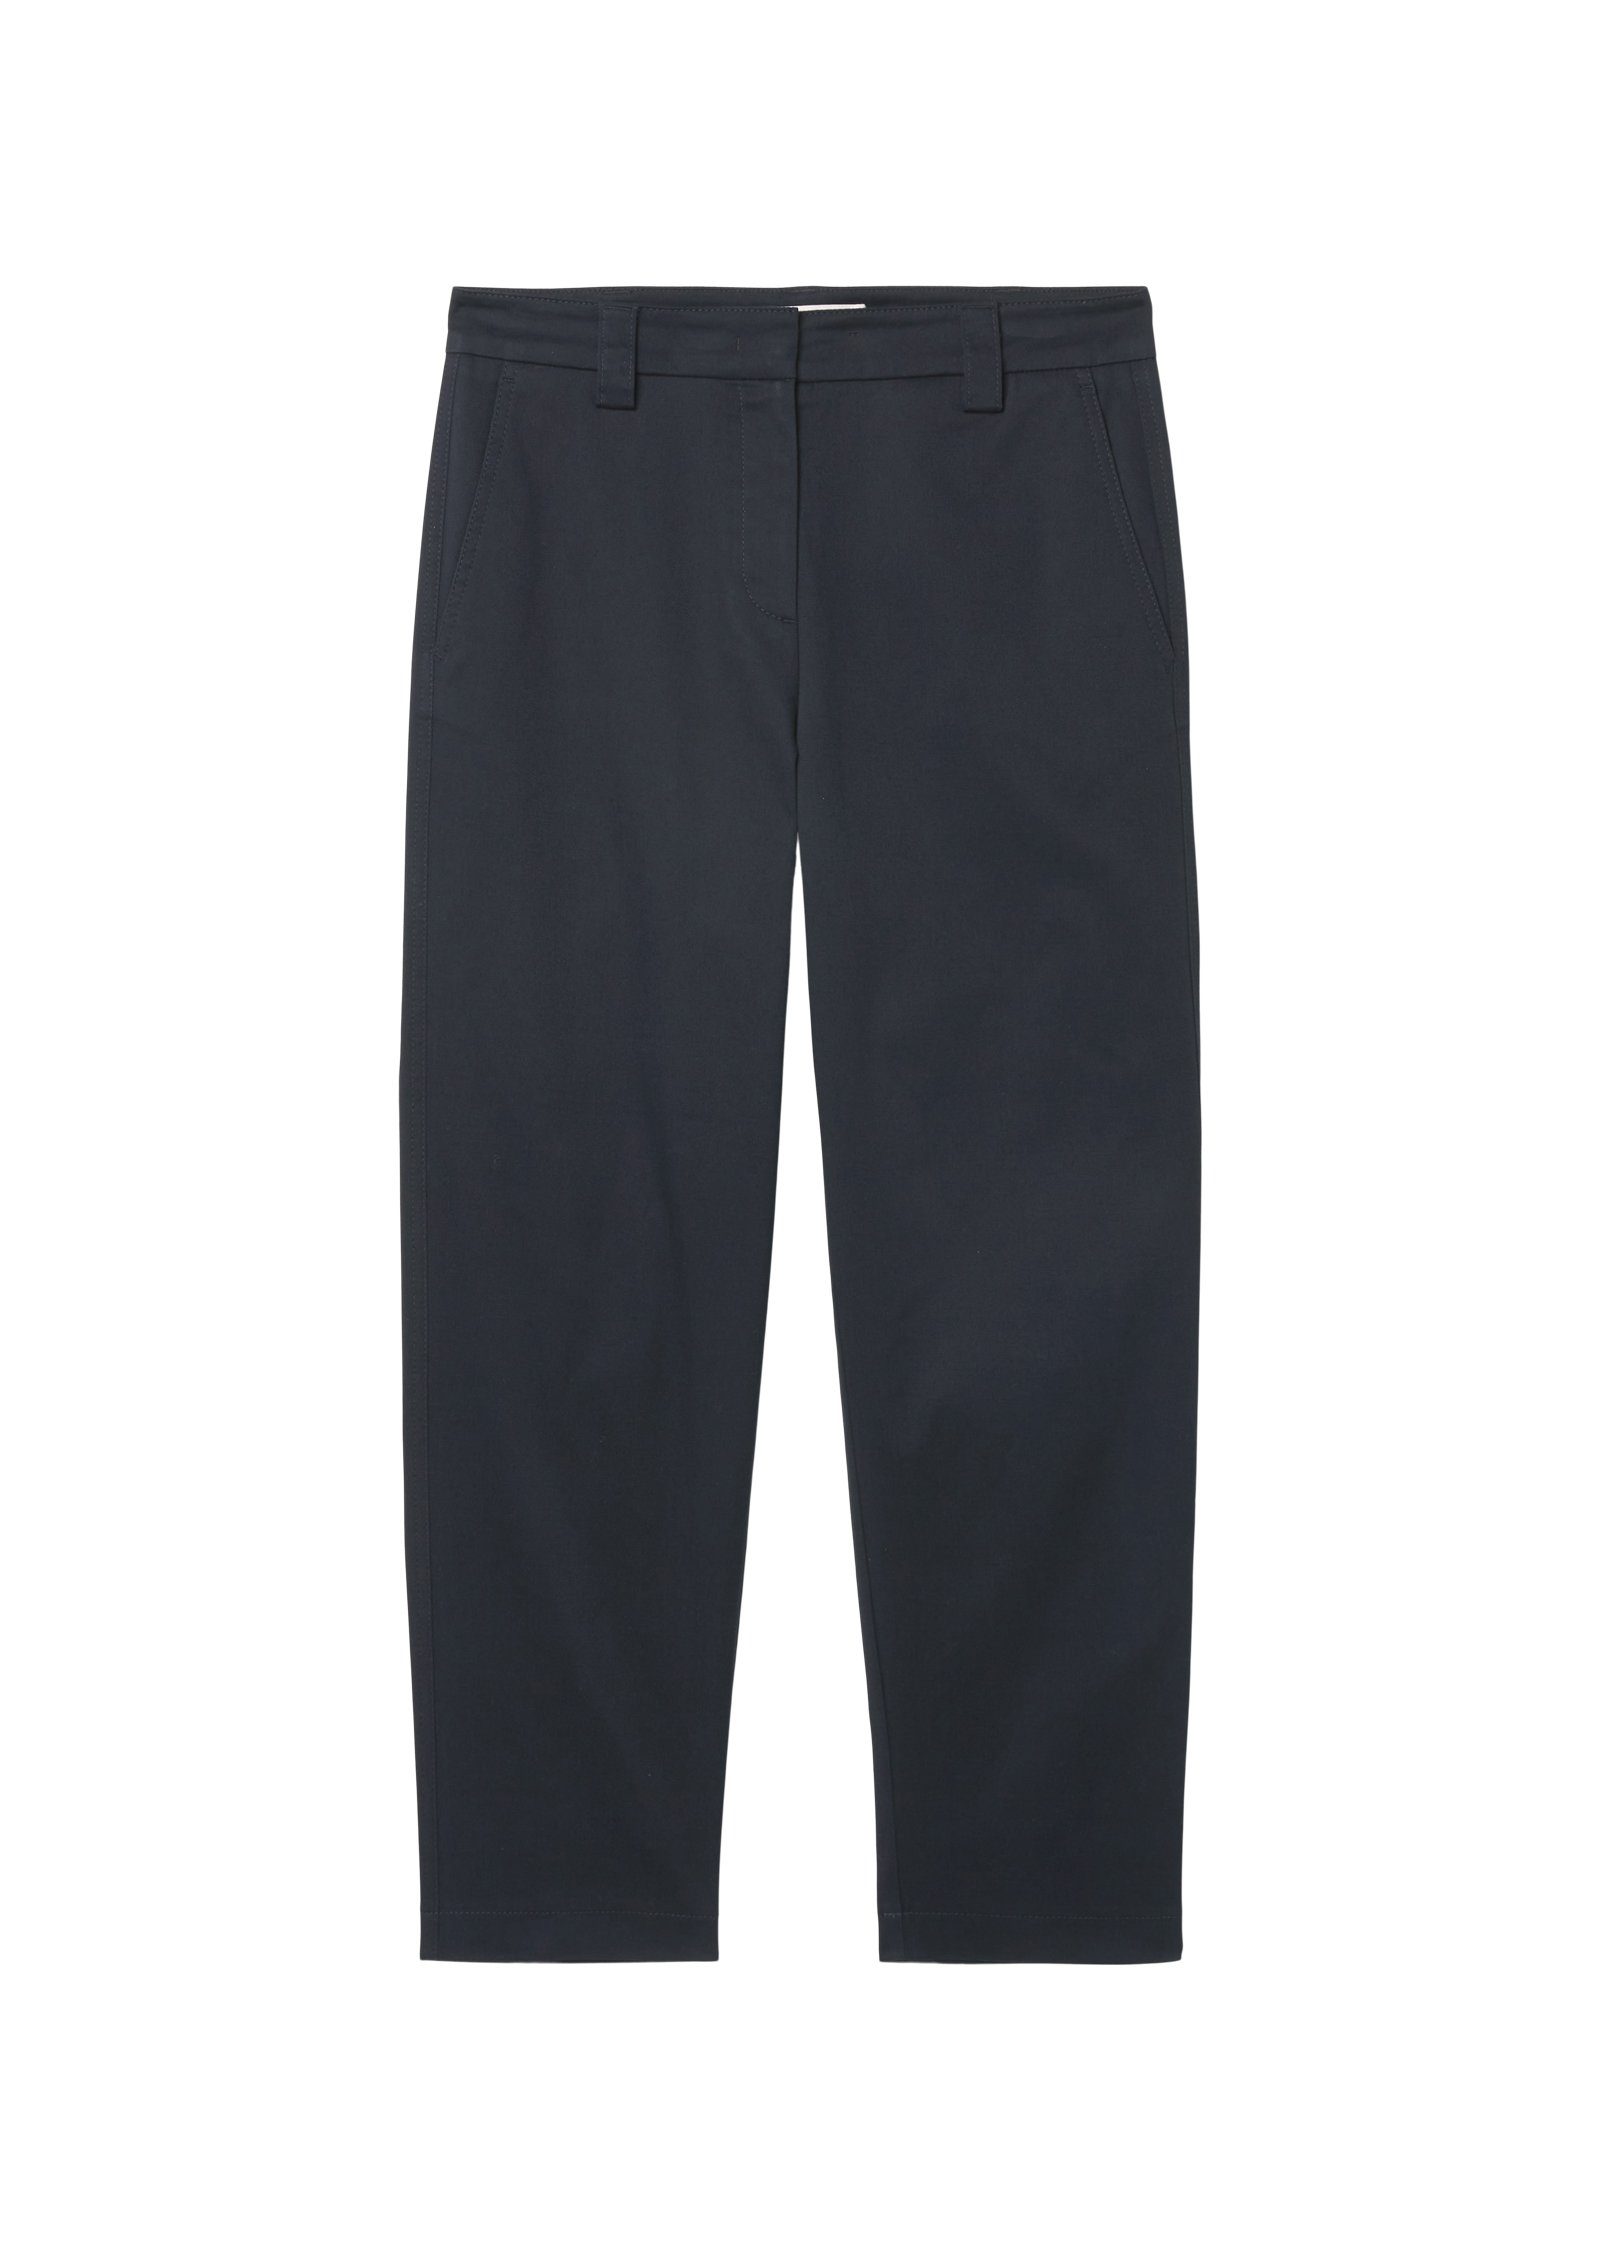 high modern pocket blue rise, welt Chino-Style style, tapered modernen leg, Marc chino 7/8-Hose O'Polo Pants, im thunder